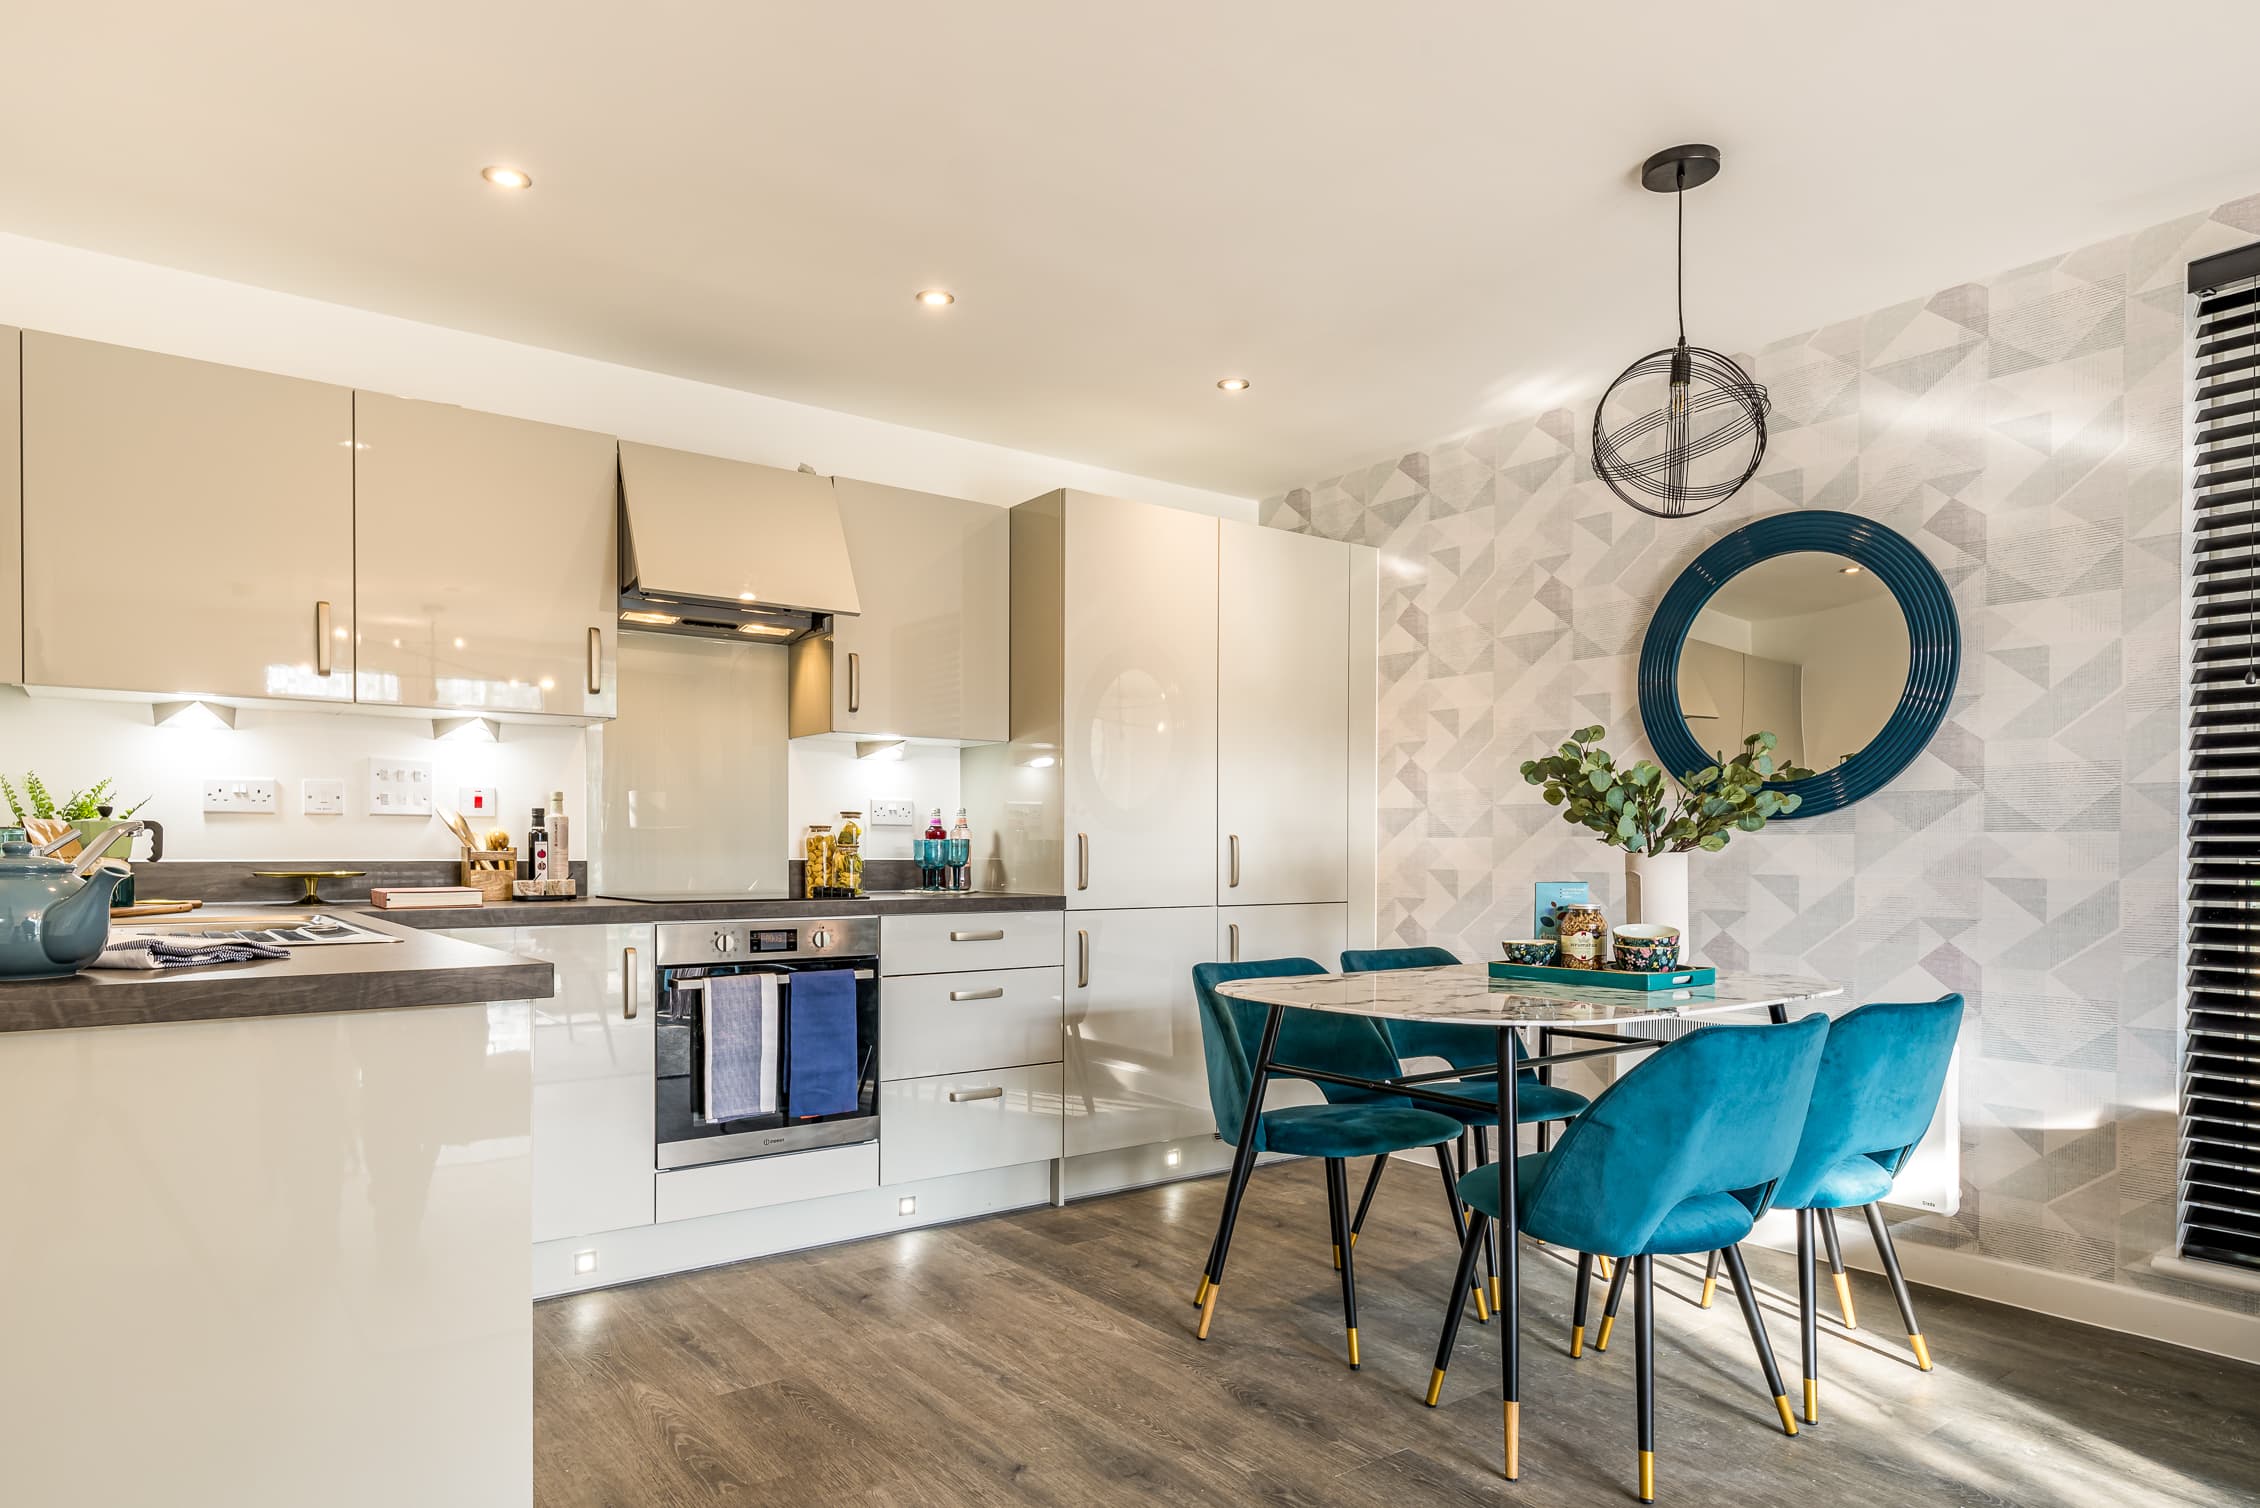 Internal photography of Southern Home Ownership's Longcross - Shared Ownership homes available on Share to Buy